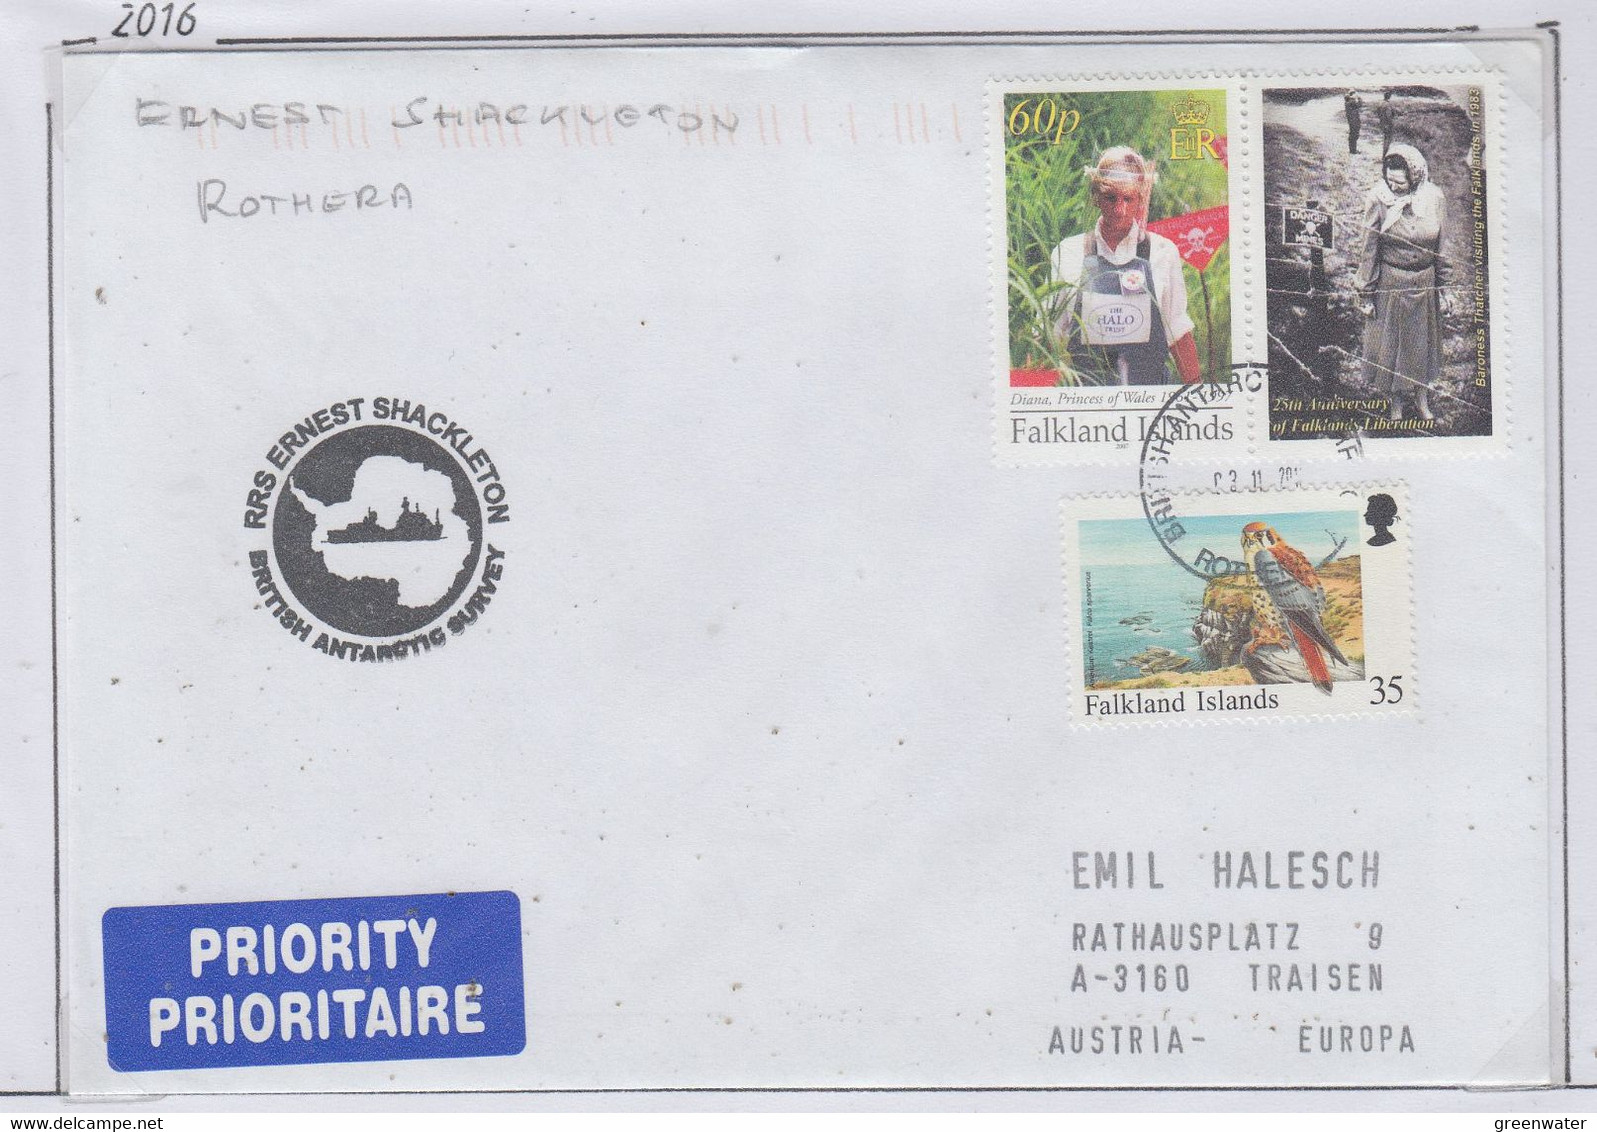 British Antarctic Territory (BAT)  2016 Cover Ship Visit RRS Ernest Shackleton Ca Rothera 03.11.2016 (RH185A) - Covers & Documents